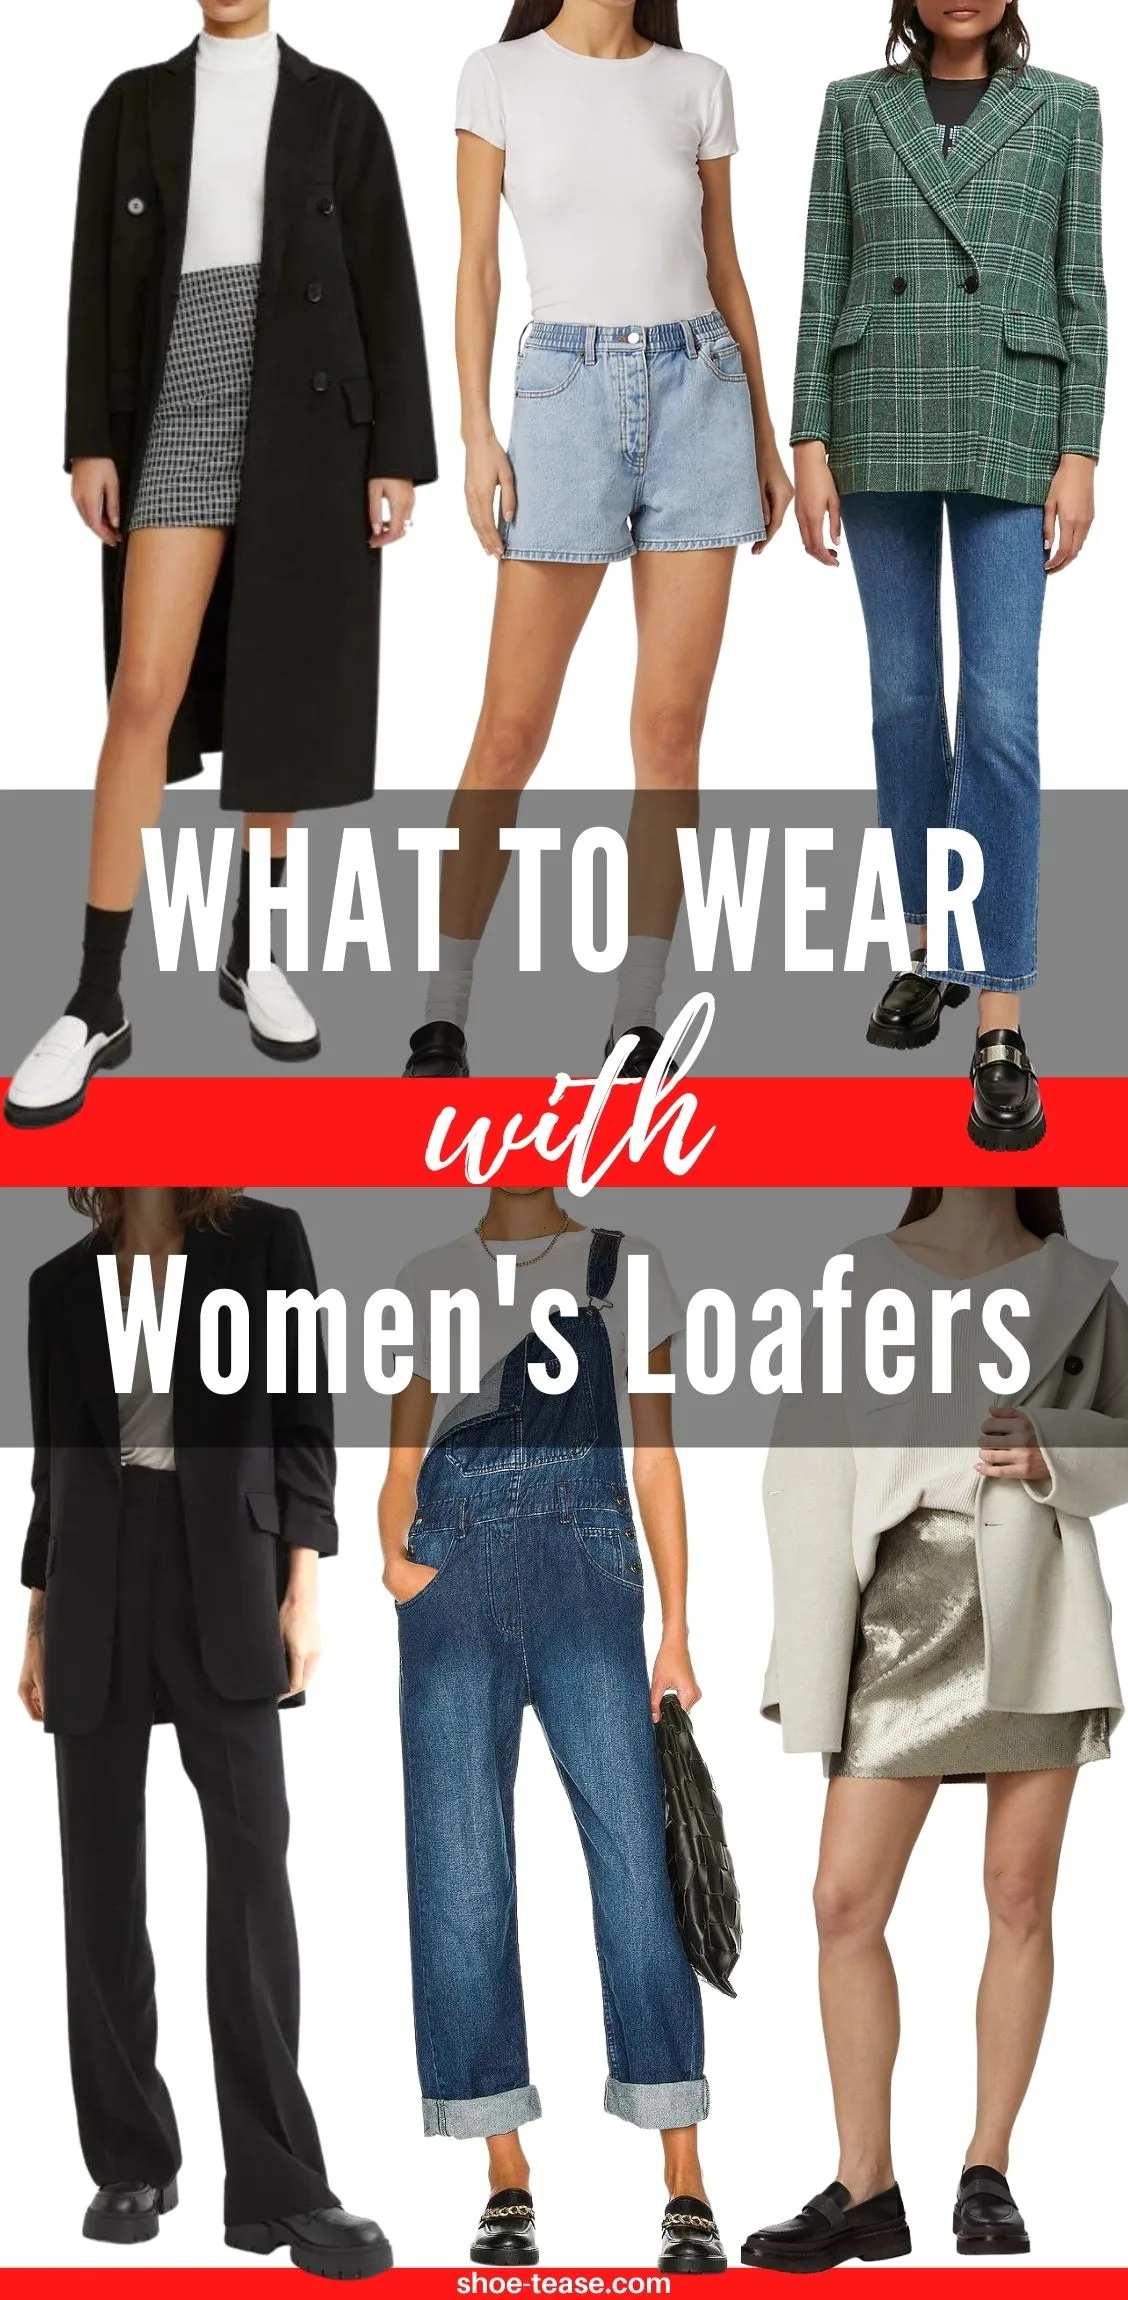 Collage of 6 women wearing different outfits with loafers under text reading what to wear with women's loafers